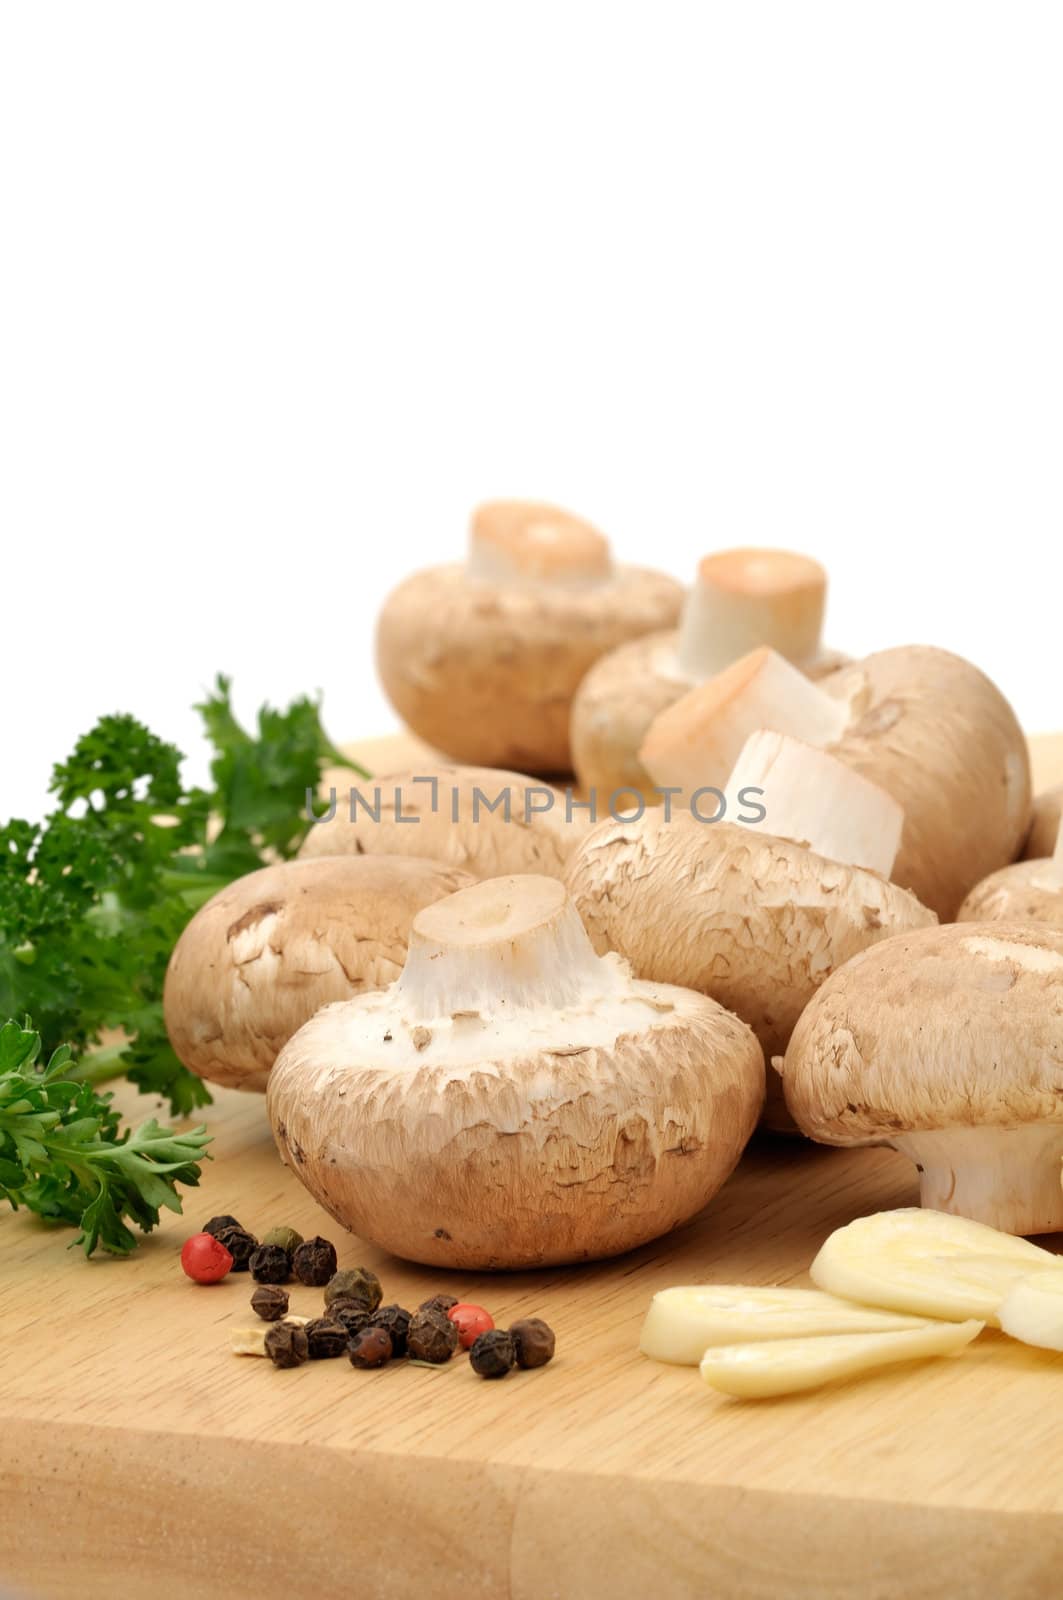 Raw ingredients on a wooden cutting board : mushrooms, parsley, whole pepper and garlic